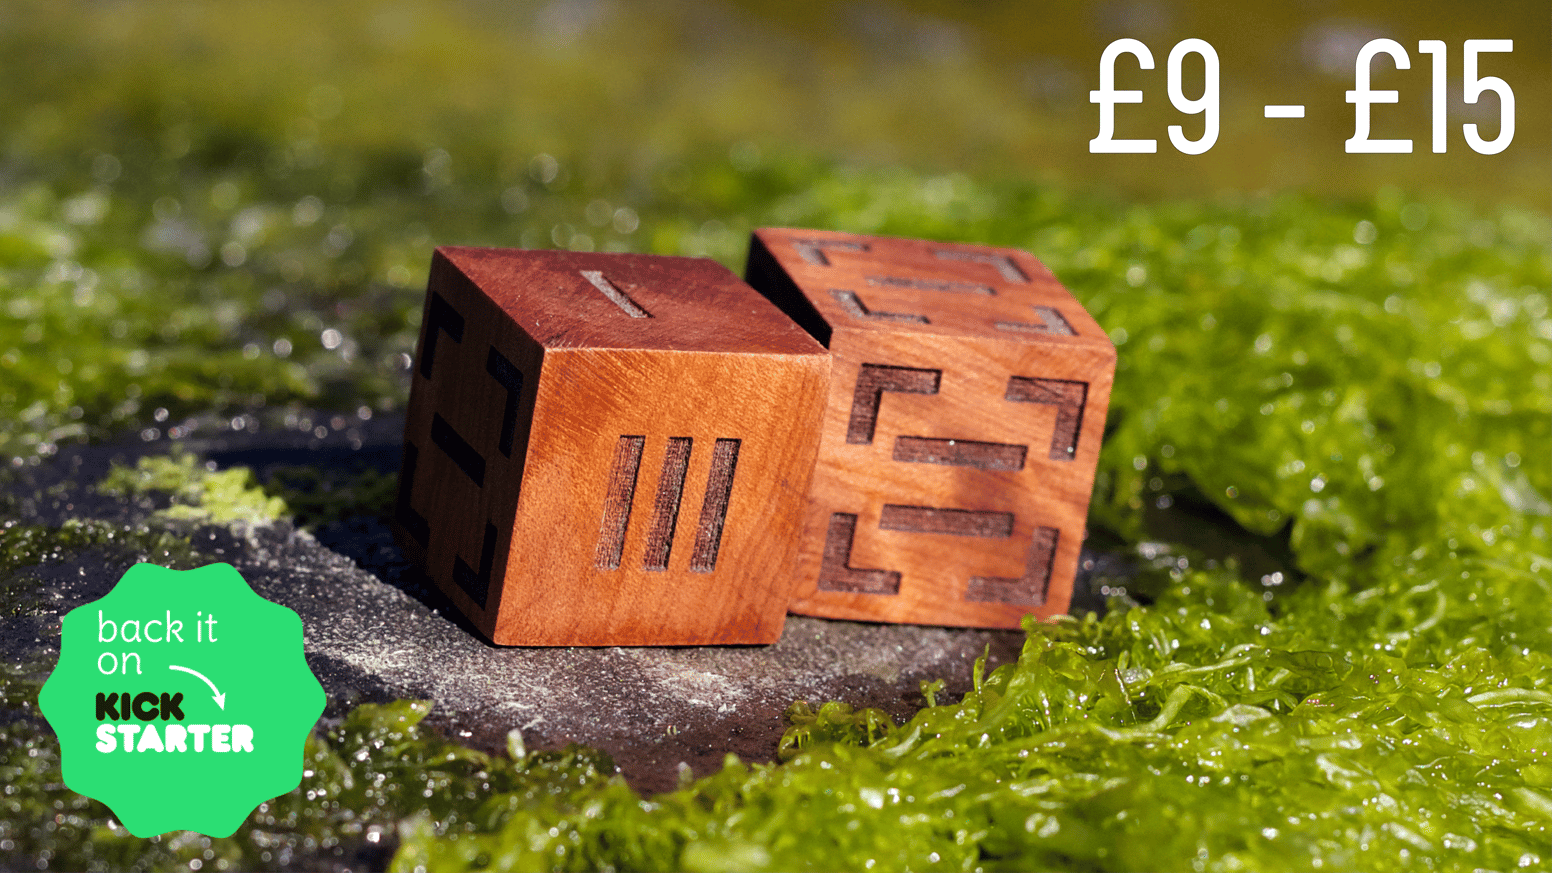 Prehistoric dice, handcrafted from Ancient Kauri, the world's oldest wood - perfectly preserved since The Stone Age!